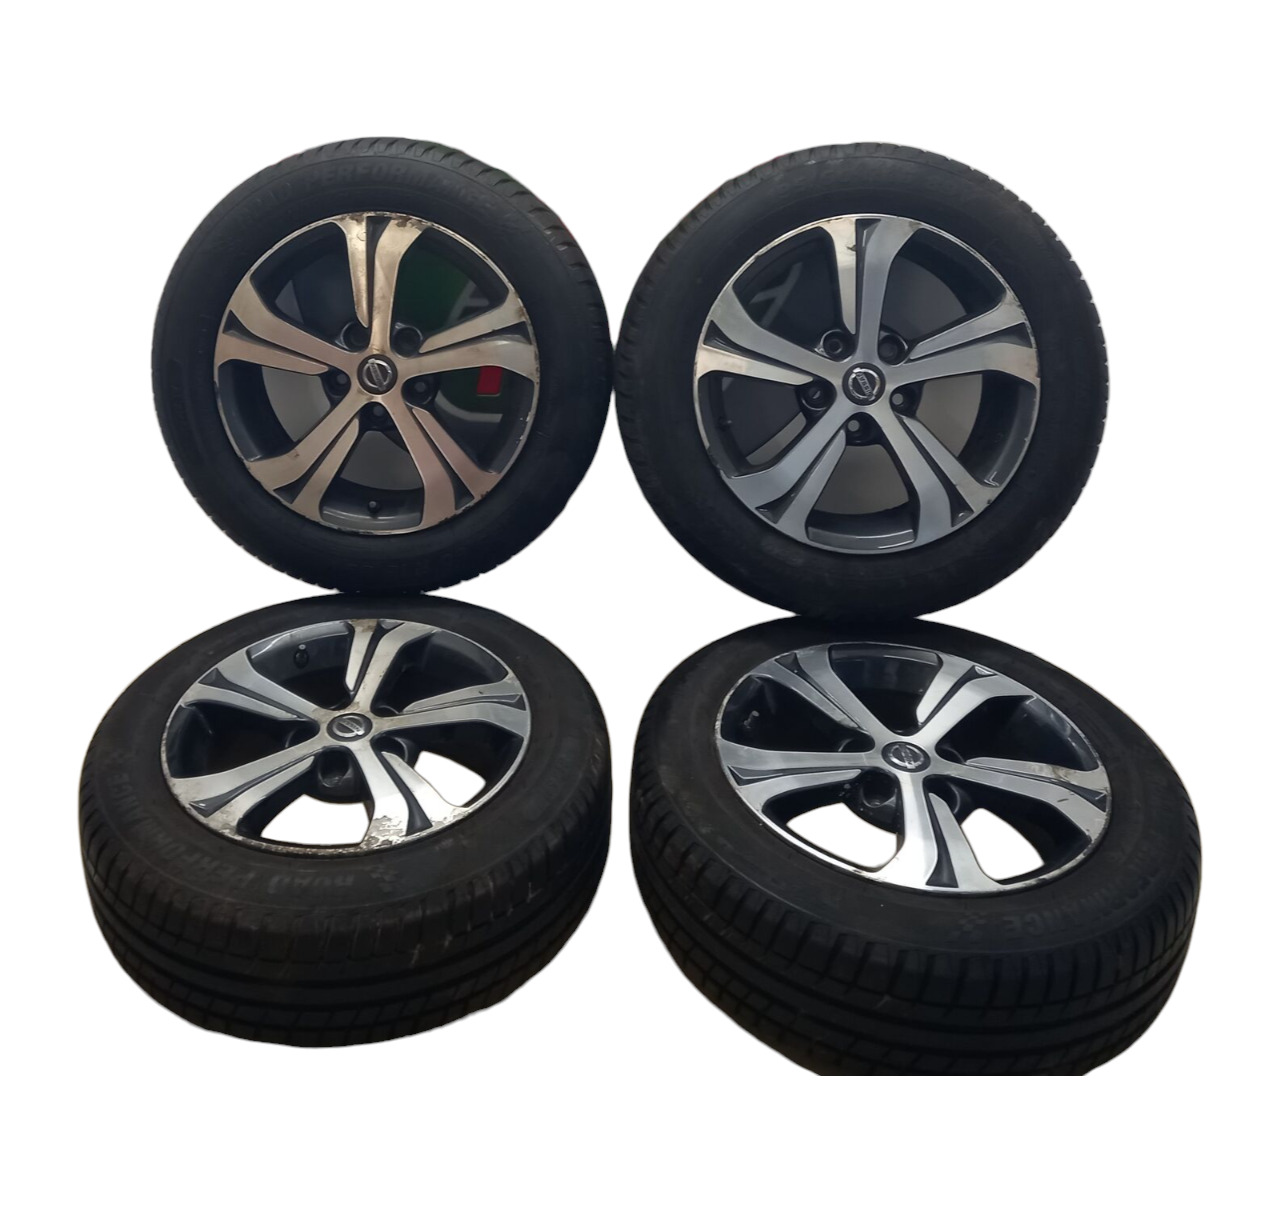 2015 Nissan Pulsar Set of 16 inch Alloy wheels with tyres 195 60 R16 2014-2020